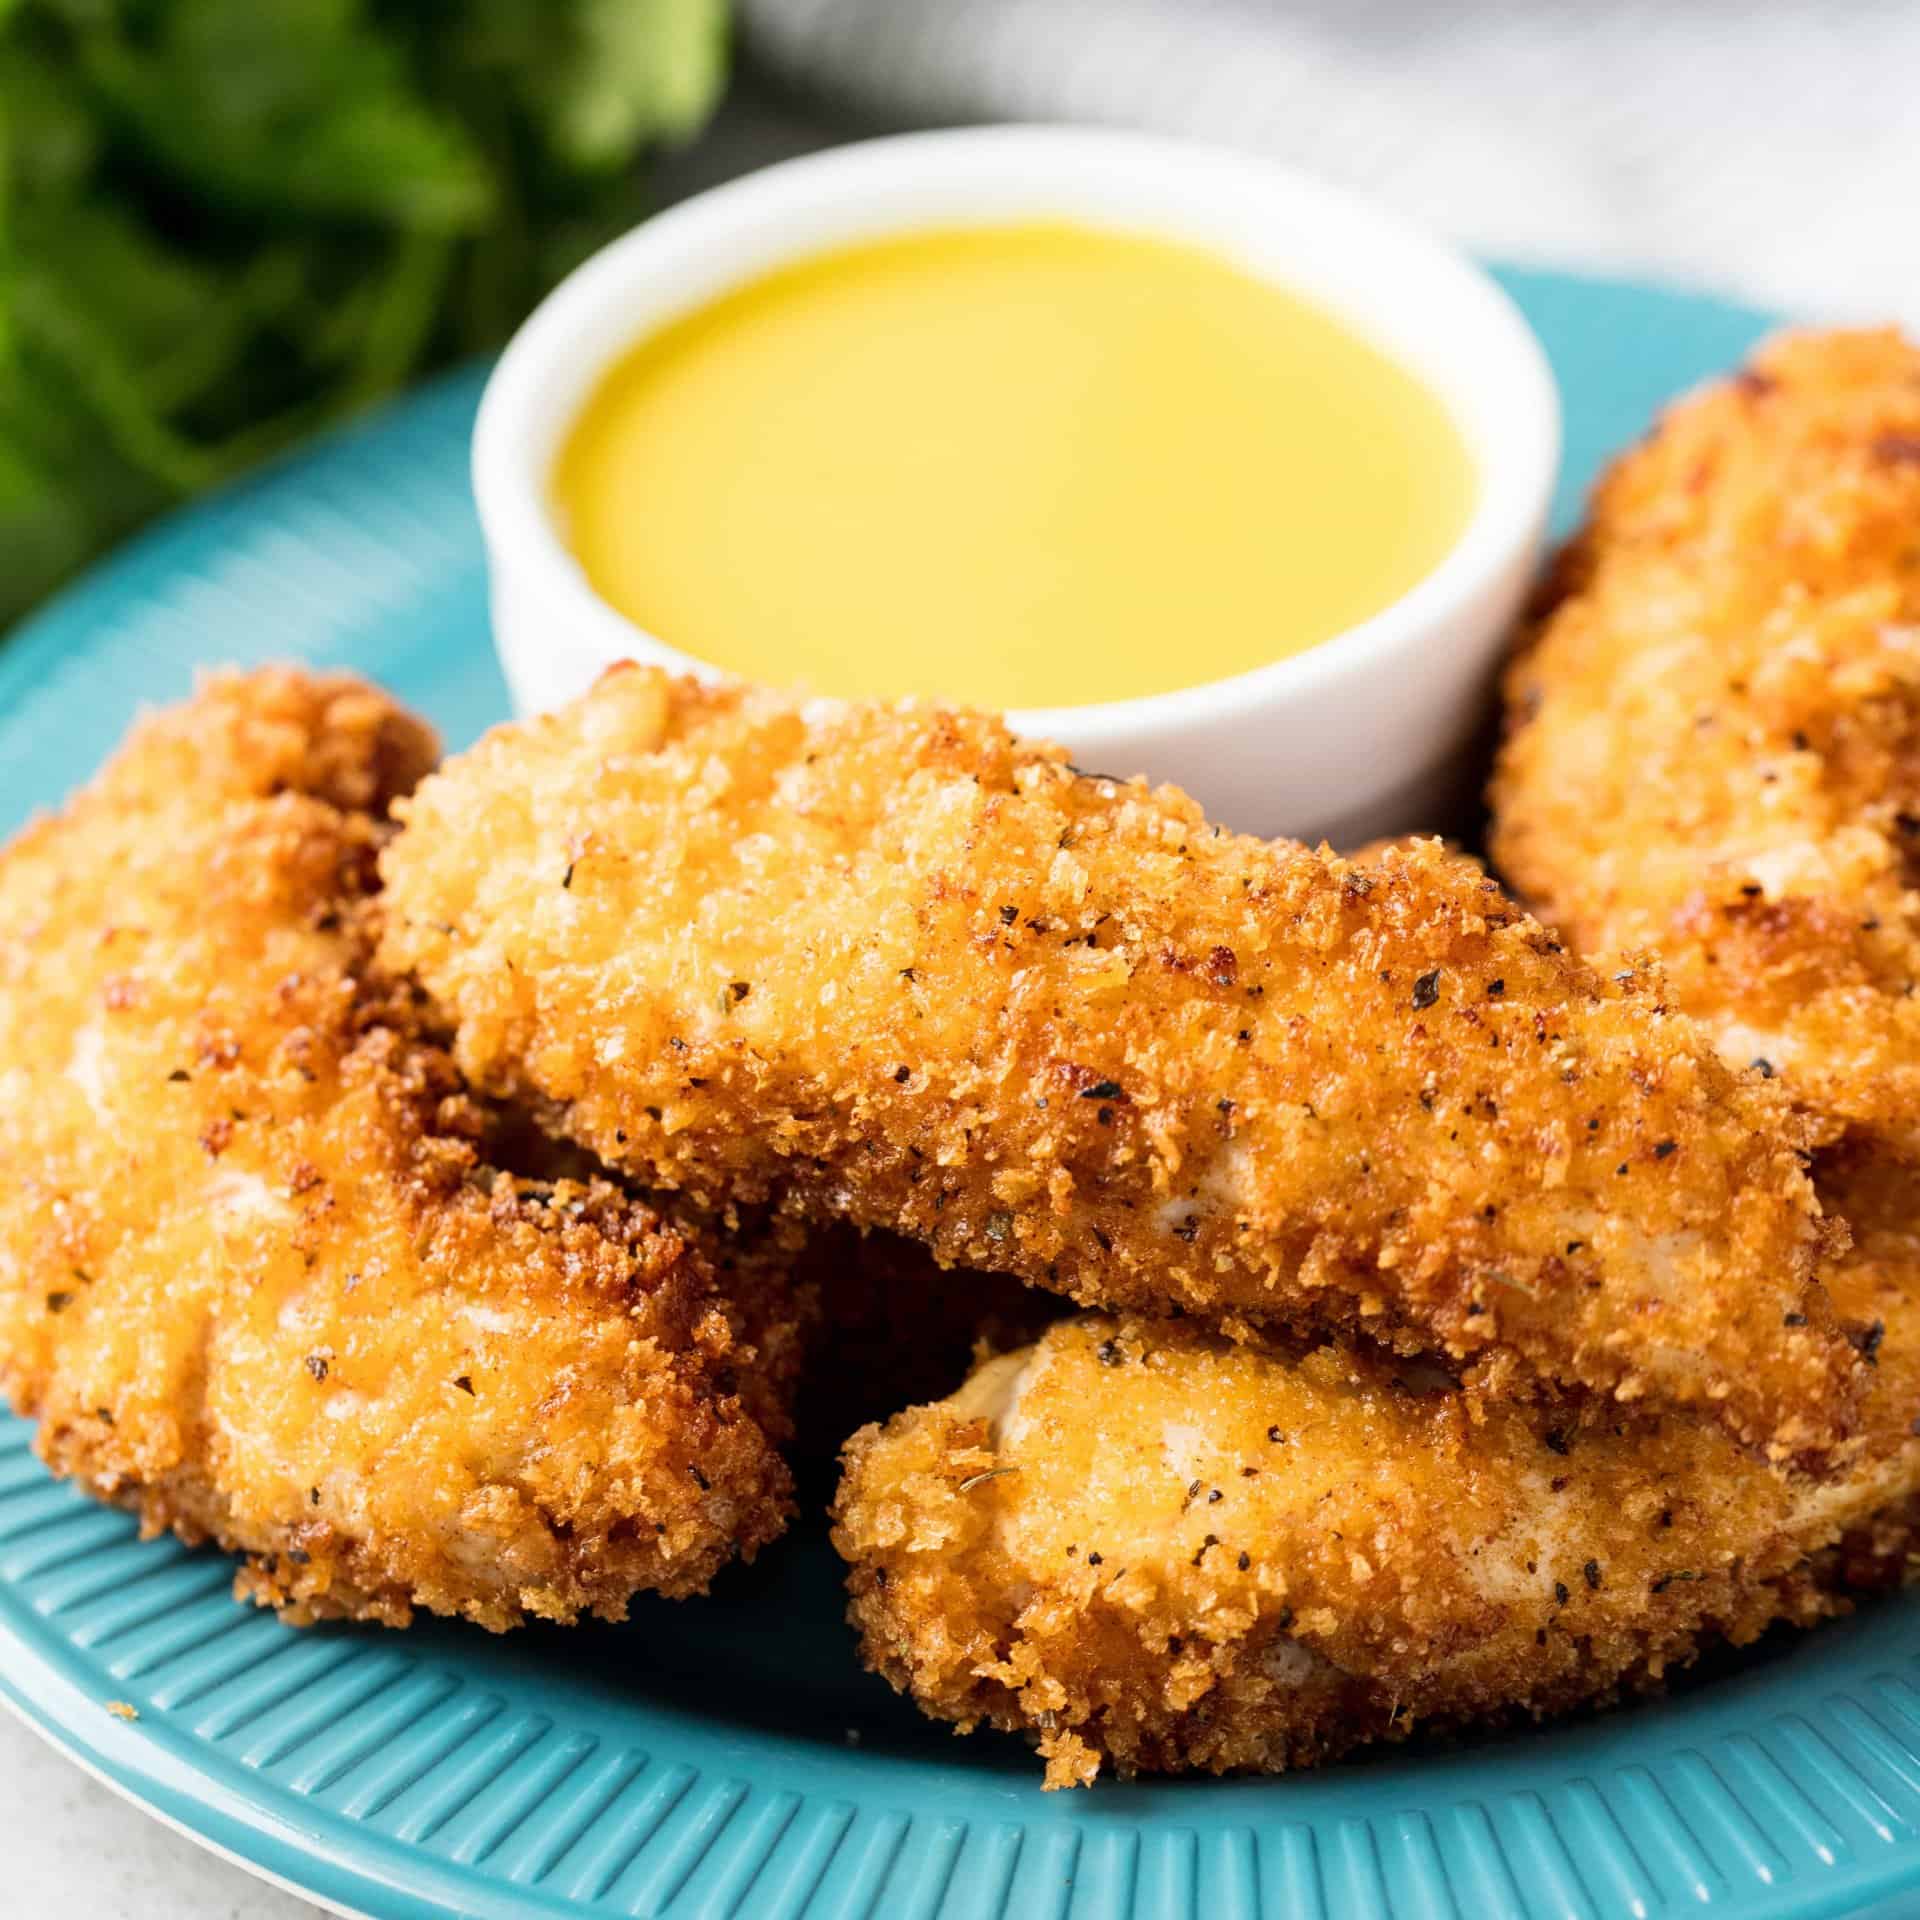 Cajun Fried Chicken Strips are super easy to make and full of cajun spices. You'll love this easy dinner and all that fried chicken will have you licking your fingers!